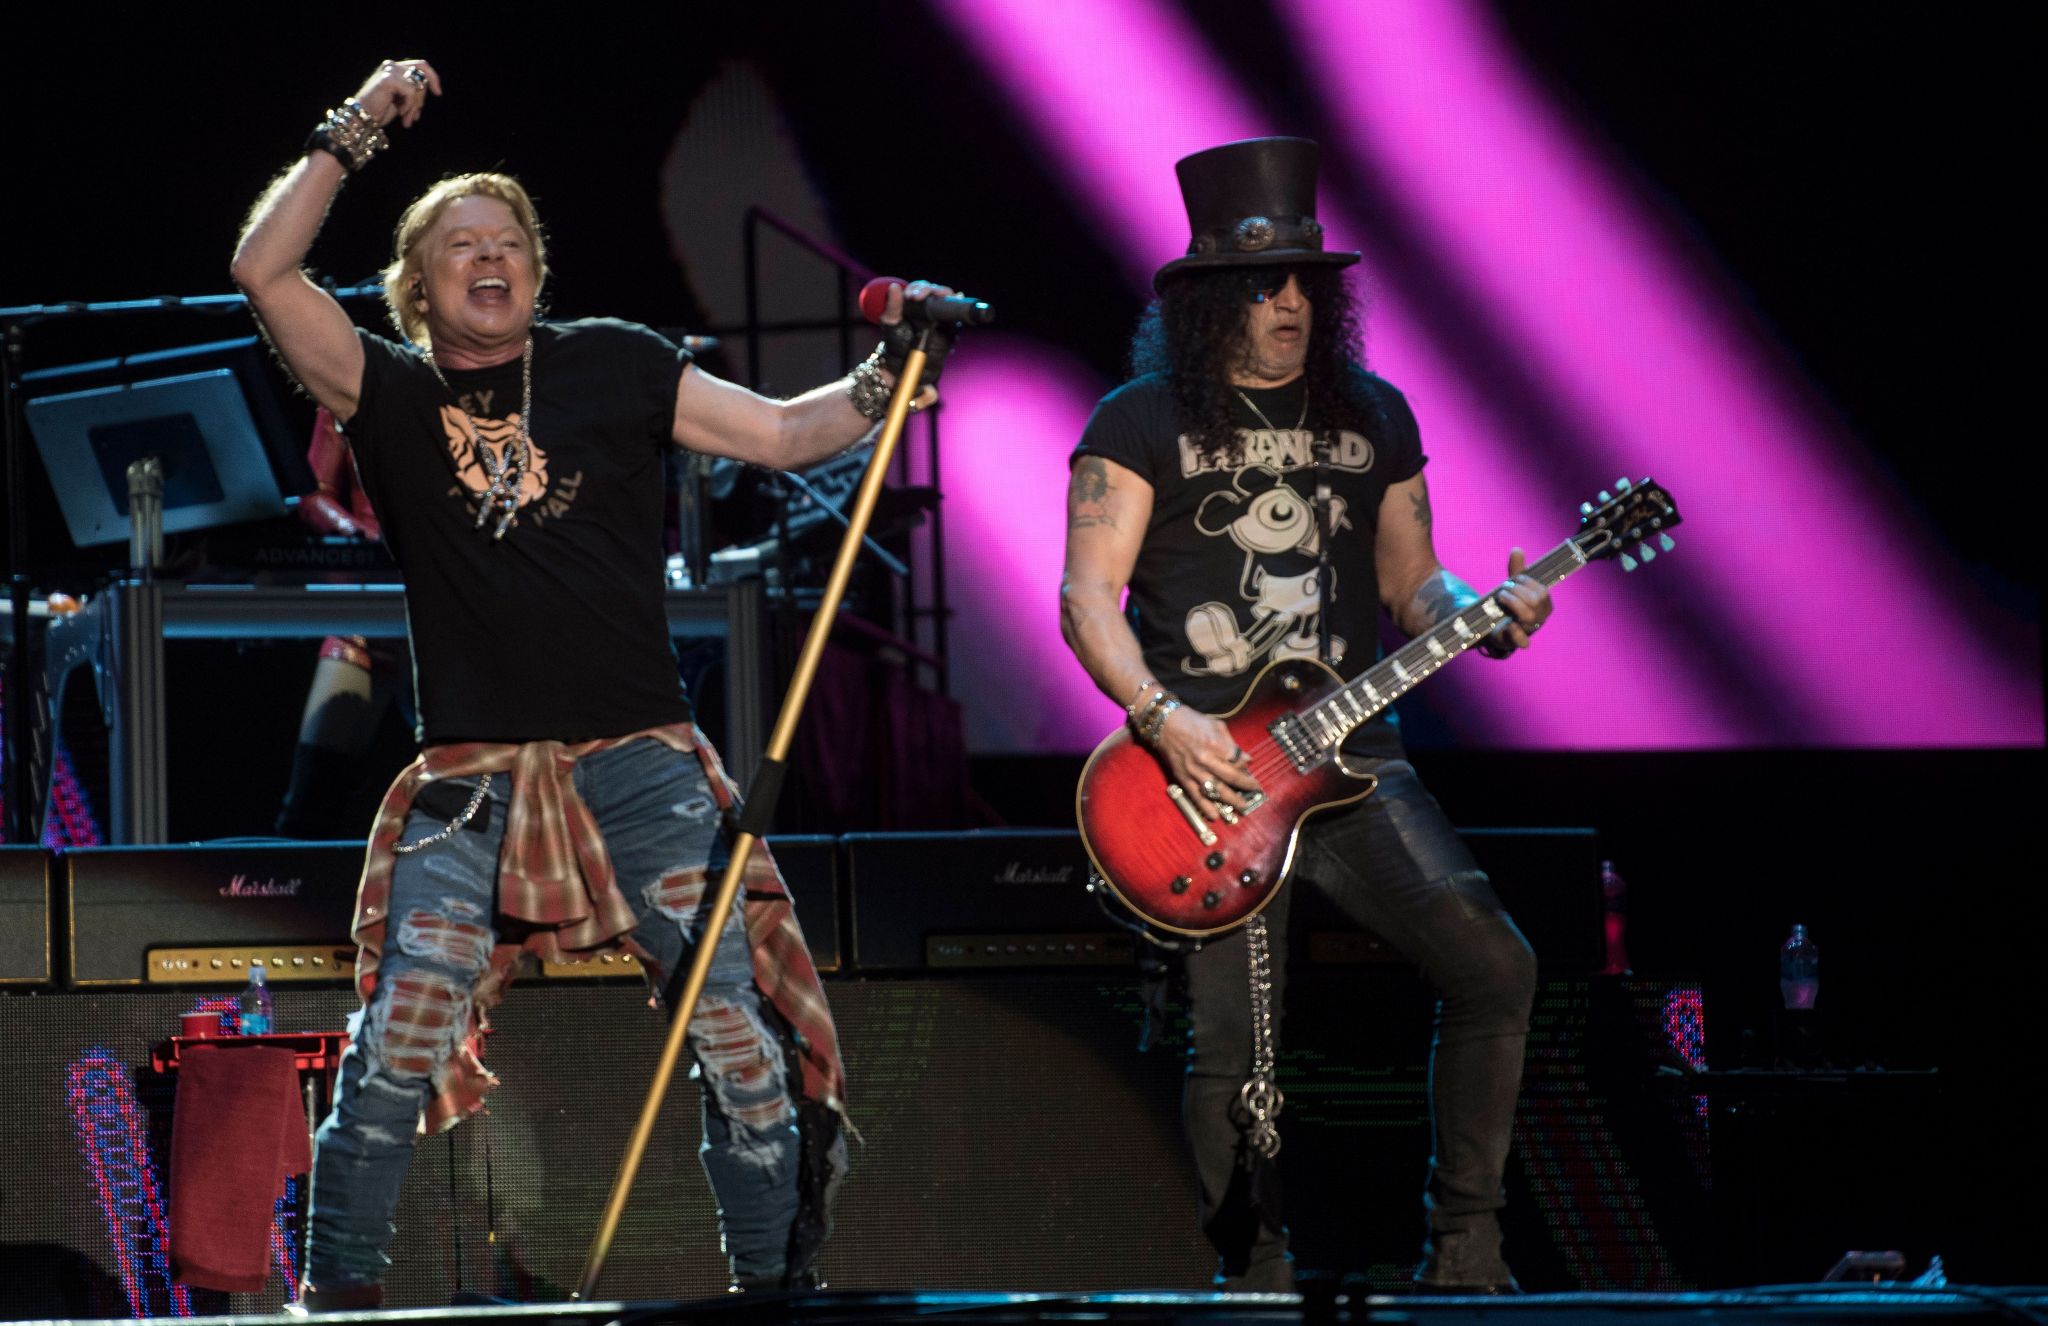 Bottlerock Cuts Off Guns N Roses Set As The Band Plays Past Festival Curfew